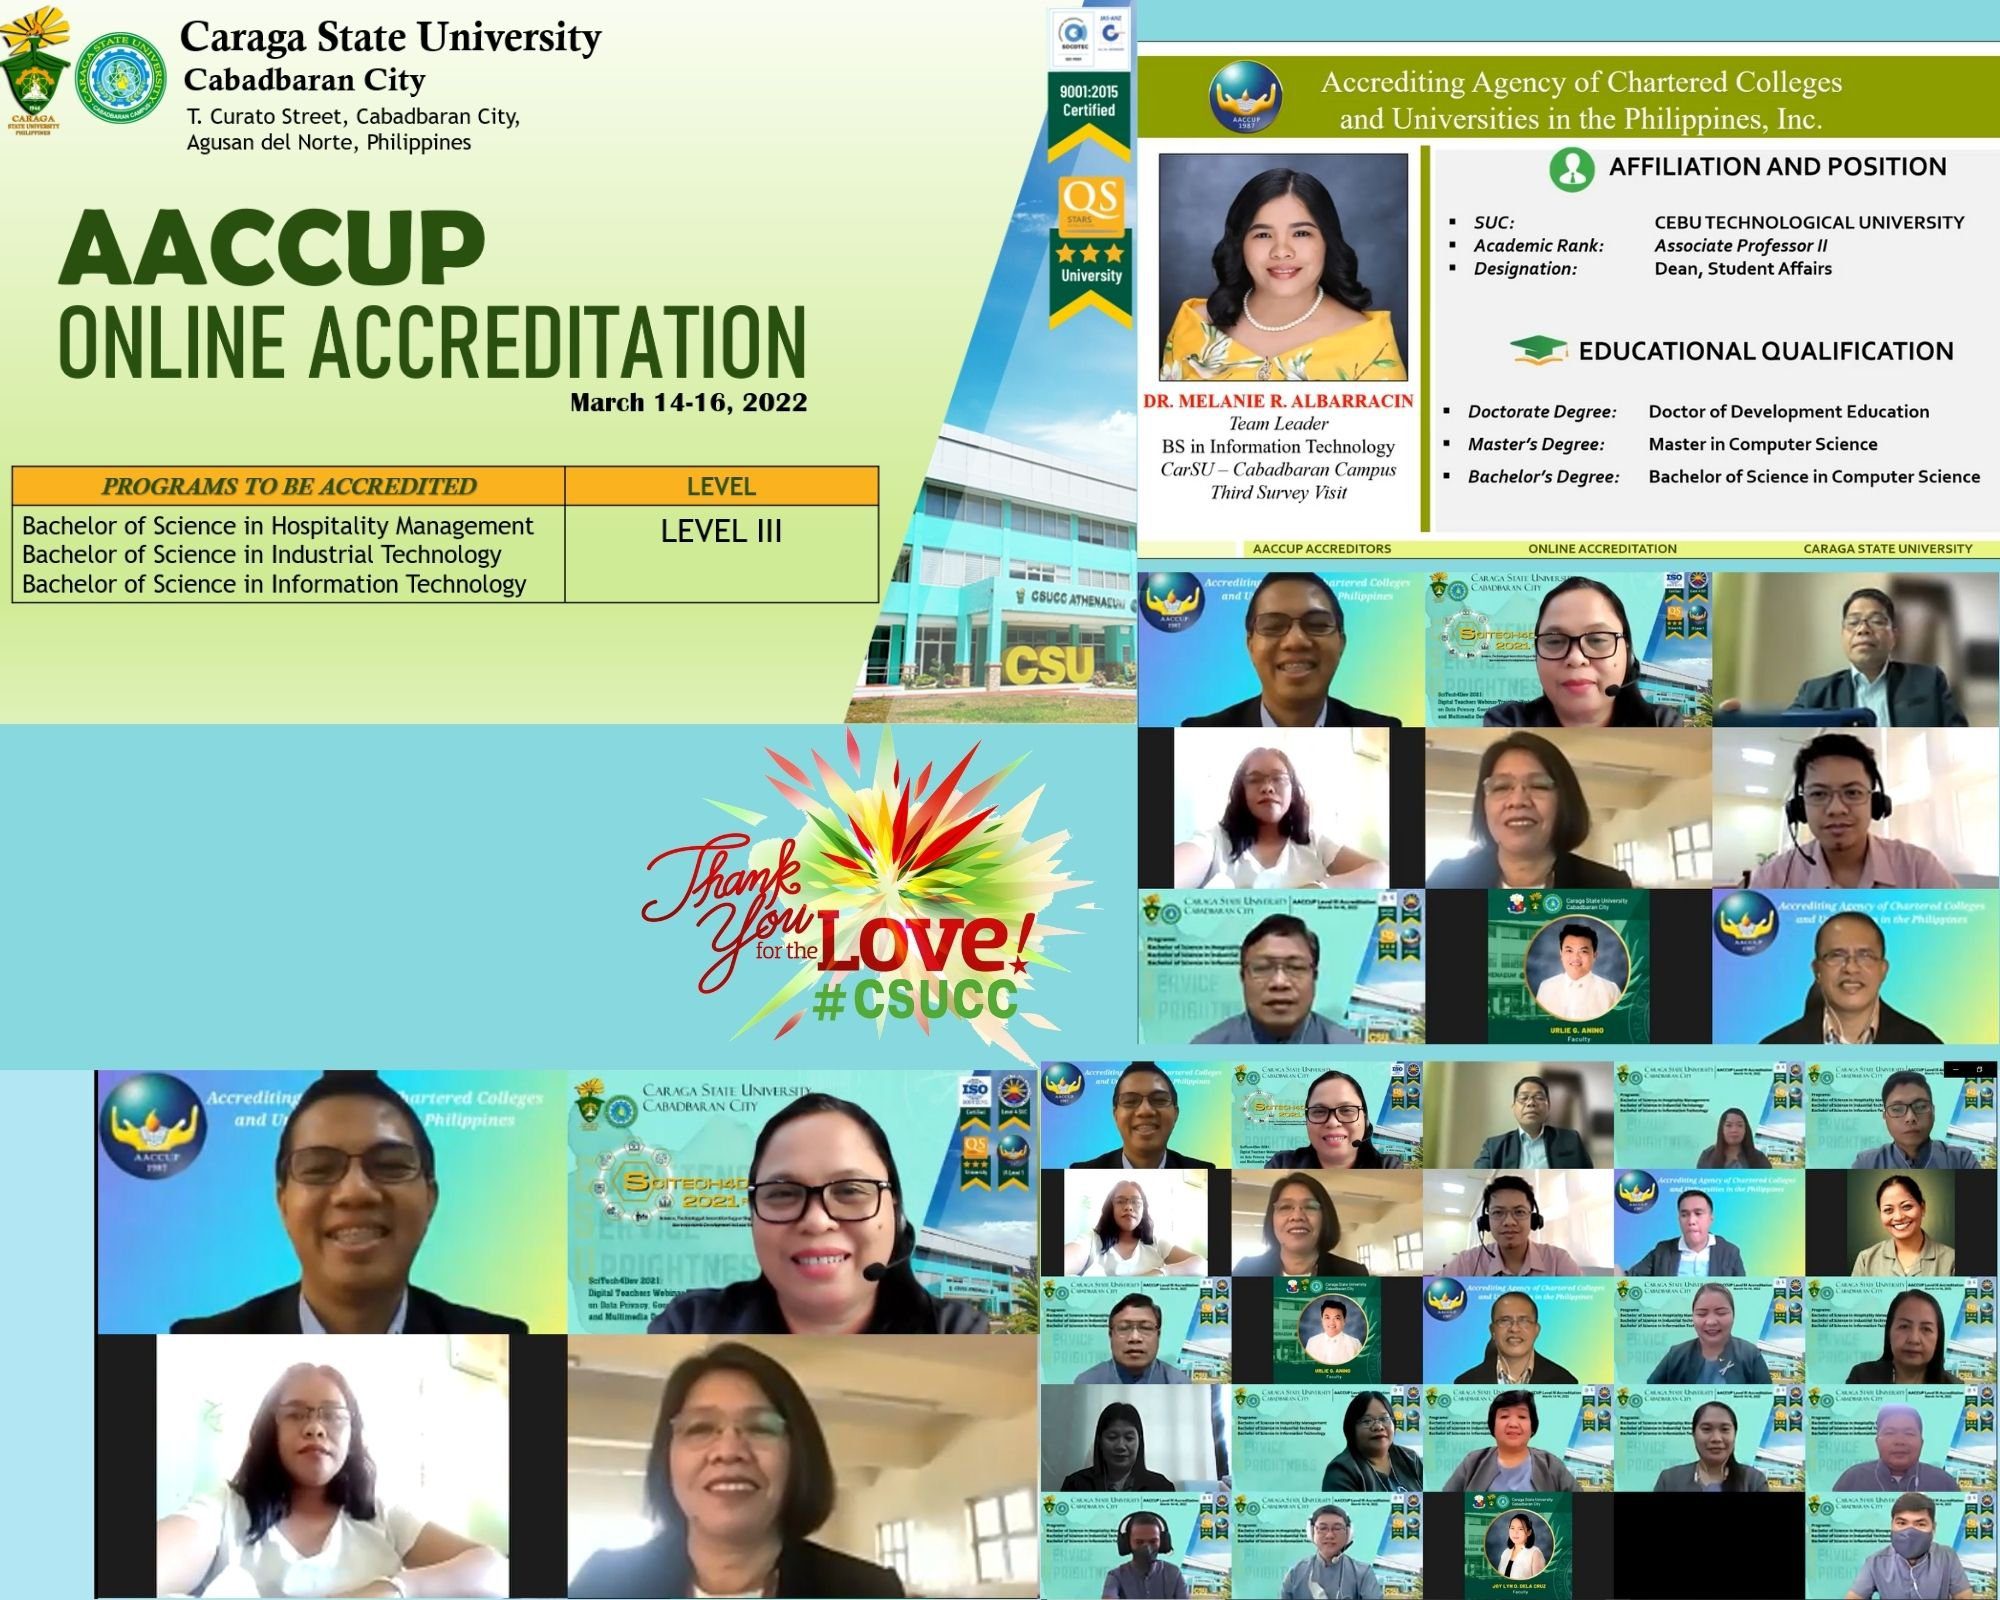 AACCUP Online Accreditation 2022